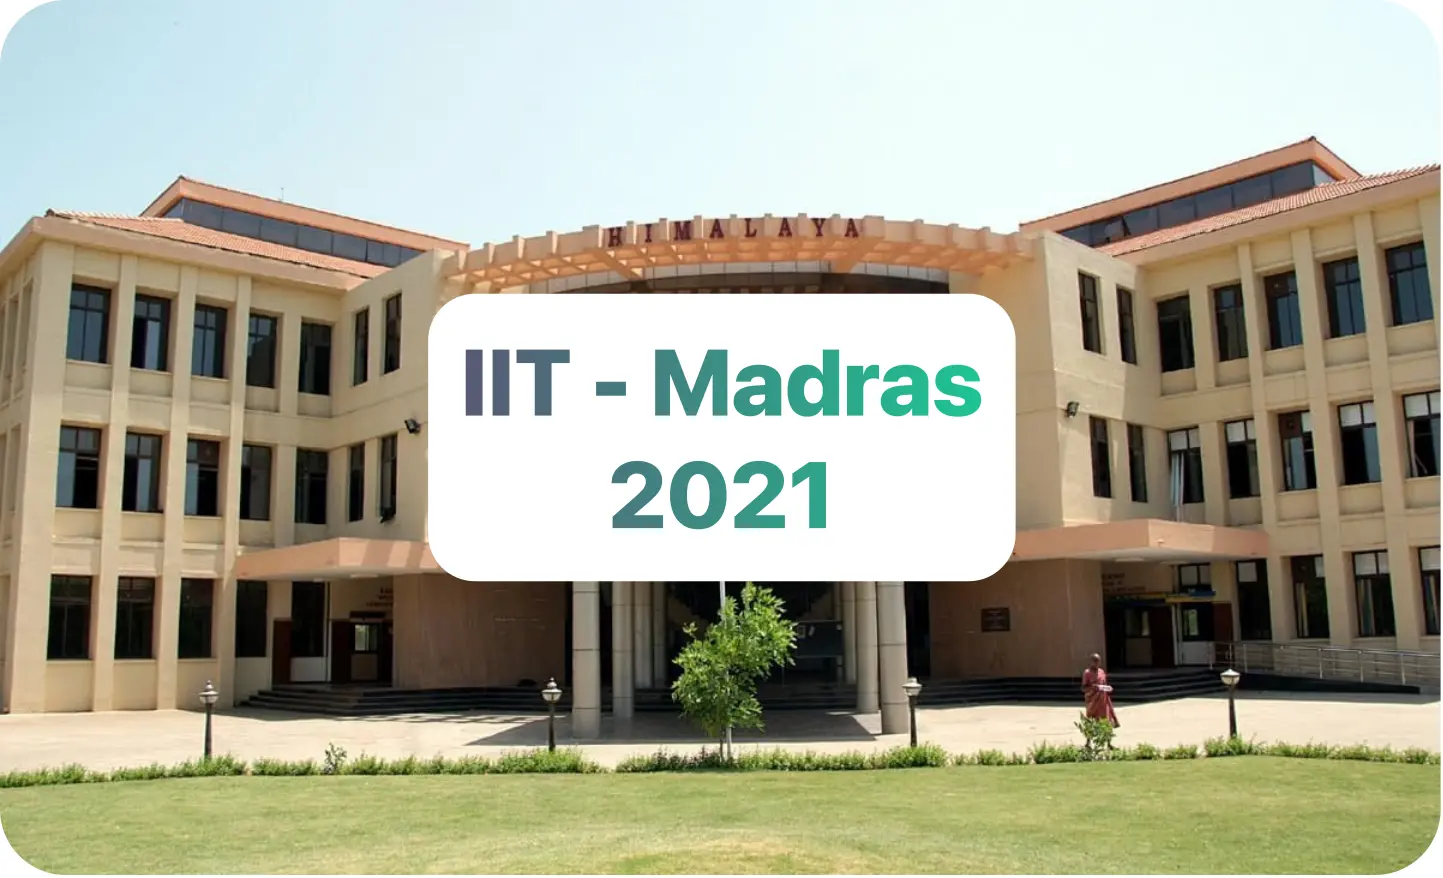 Indian Institute of Technology Madras at No. 1 position among all IITs in India.